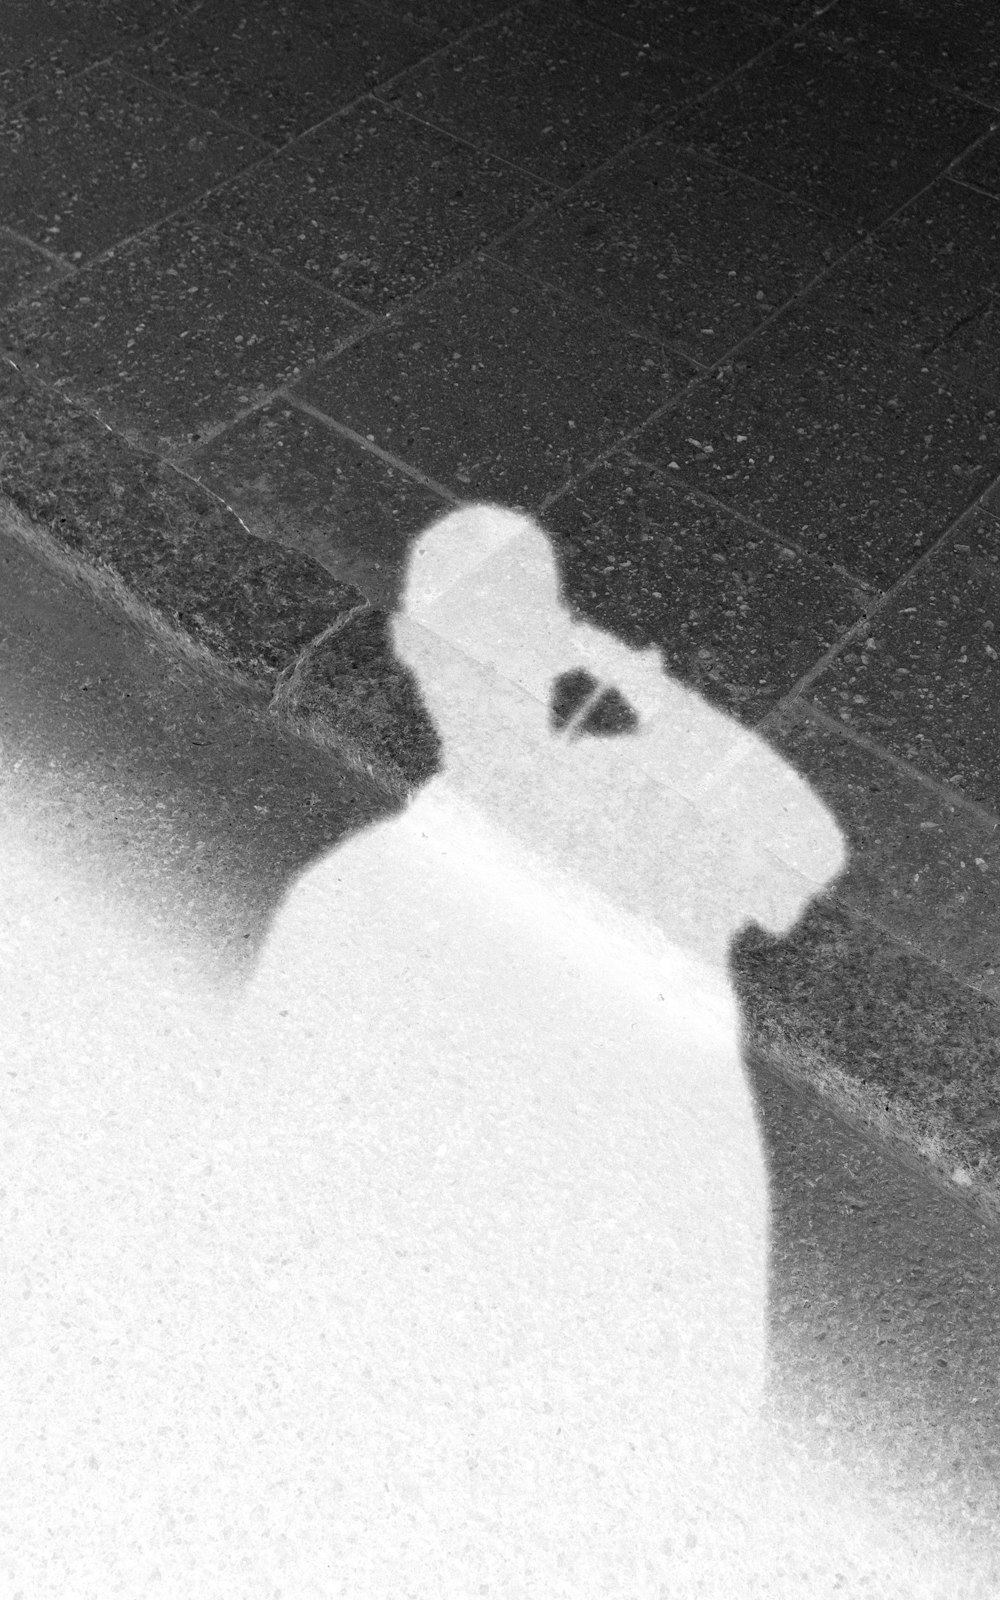 shadow of person on gray concrete floor